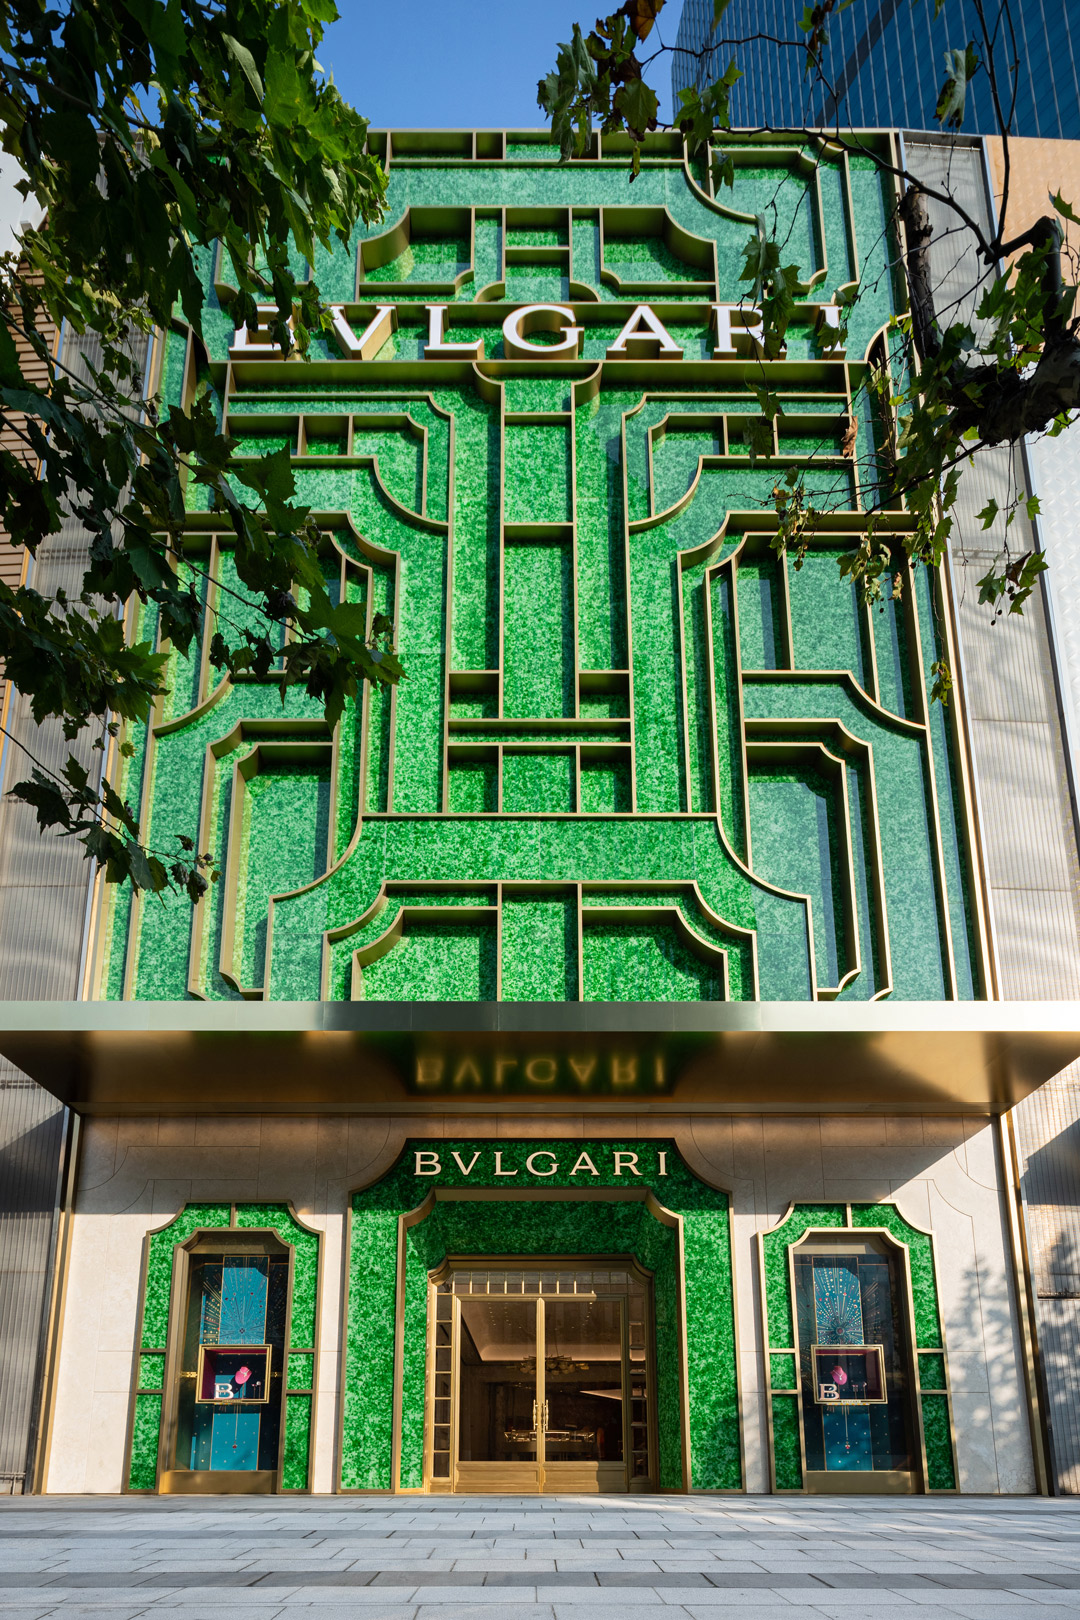 Emerald city: Old champagne bottles form the facade of Bulgari Shanghai